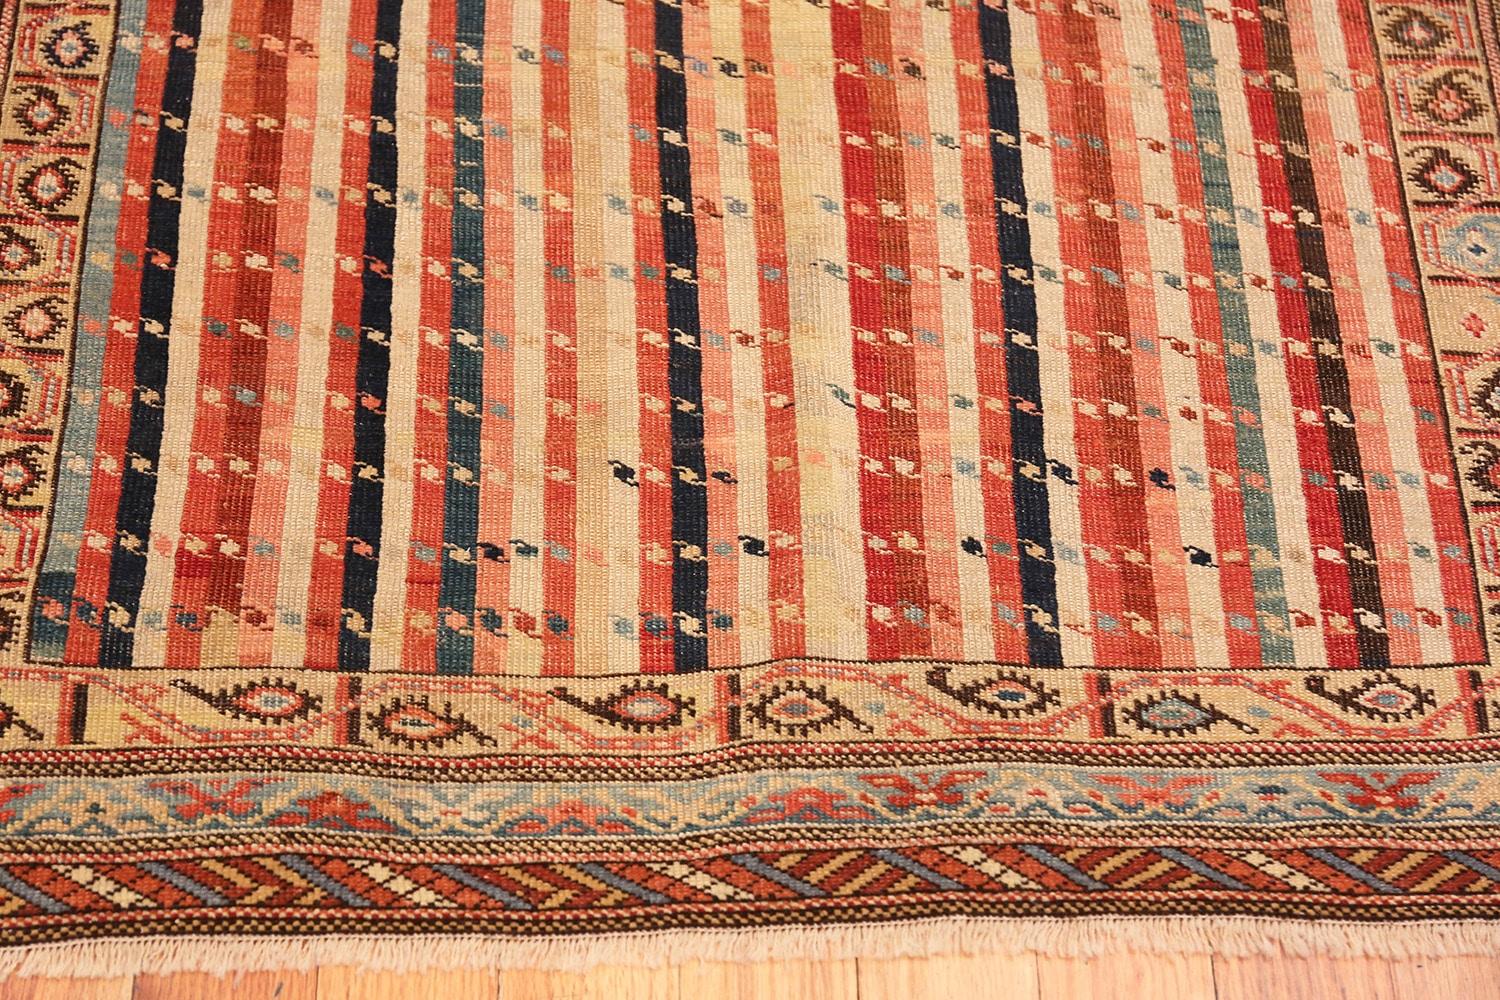 Hand-Knotted Antique Shirvan Caucasian Rug. Size: 3 ft 9 in x 5 ft 9 in (1.14 m x 1.75 m) 